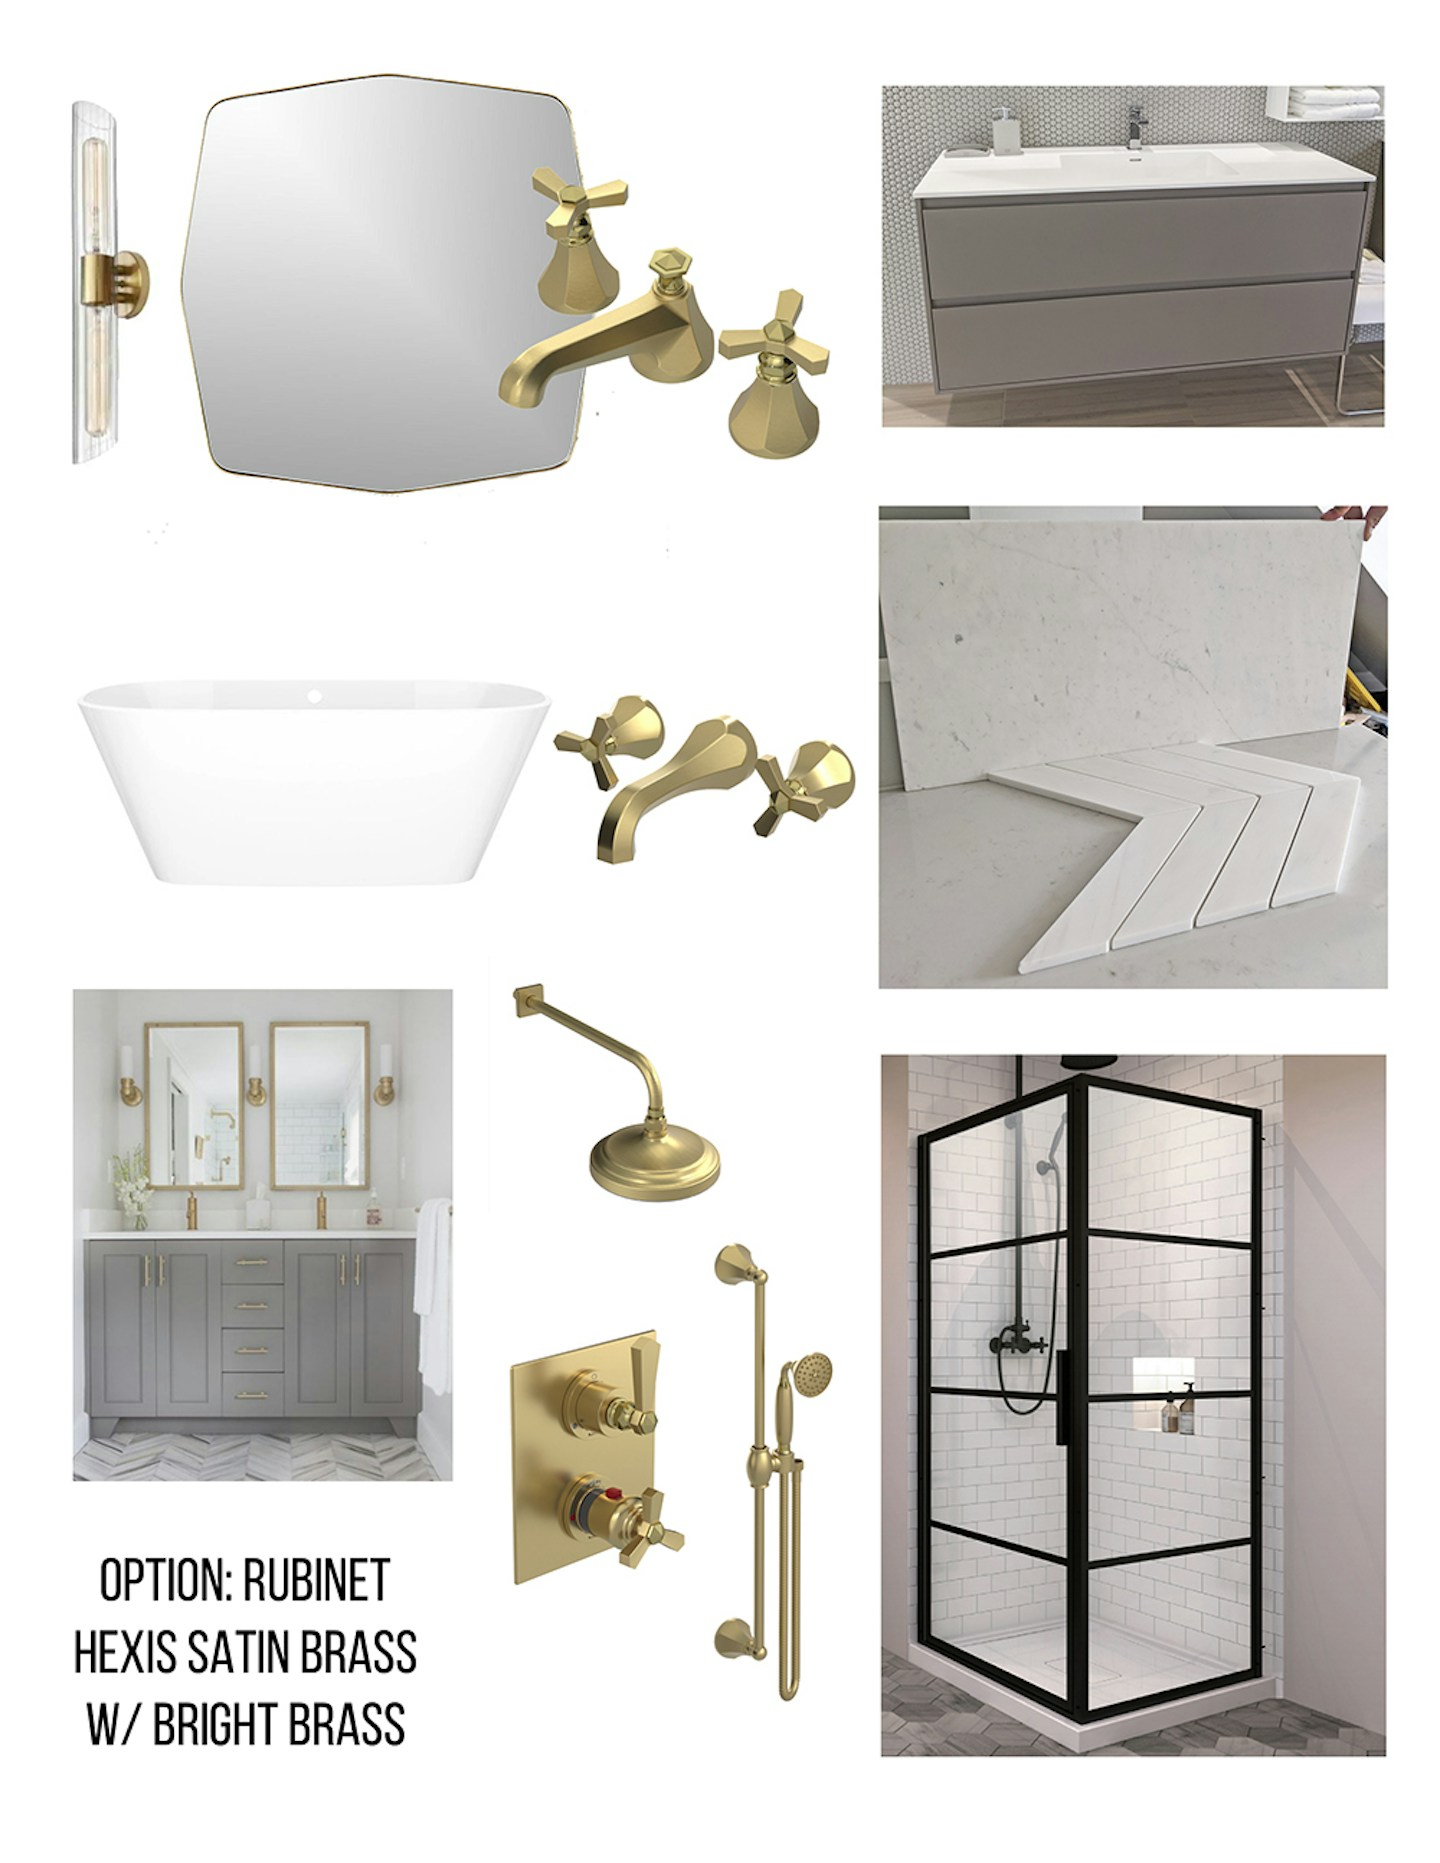 How to design a bathroom without an interior designer: choose fixtures from one line and gather all your inspiration for a cohesive design. I share more tips on designing a condo bathroom without professionals in this blog post.